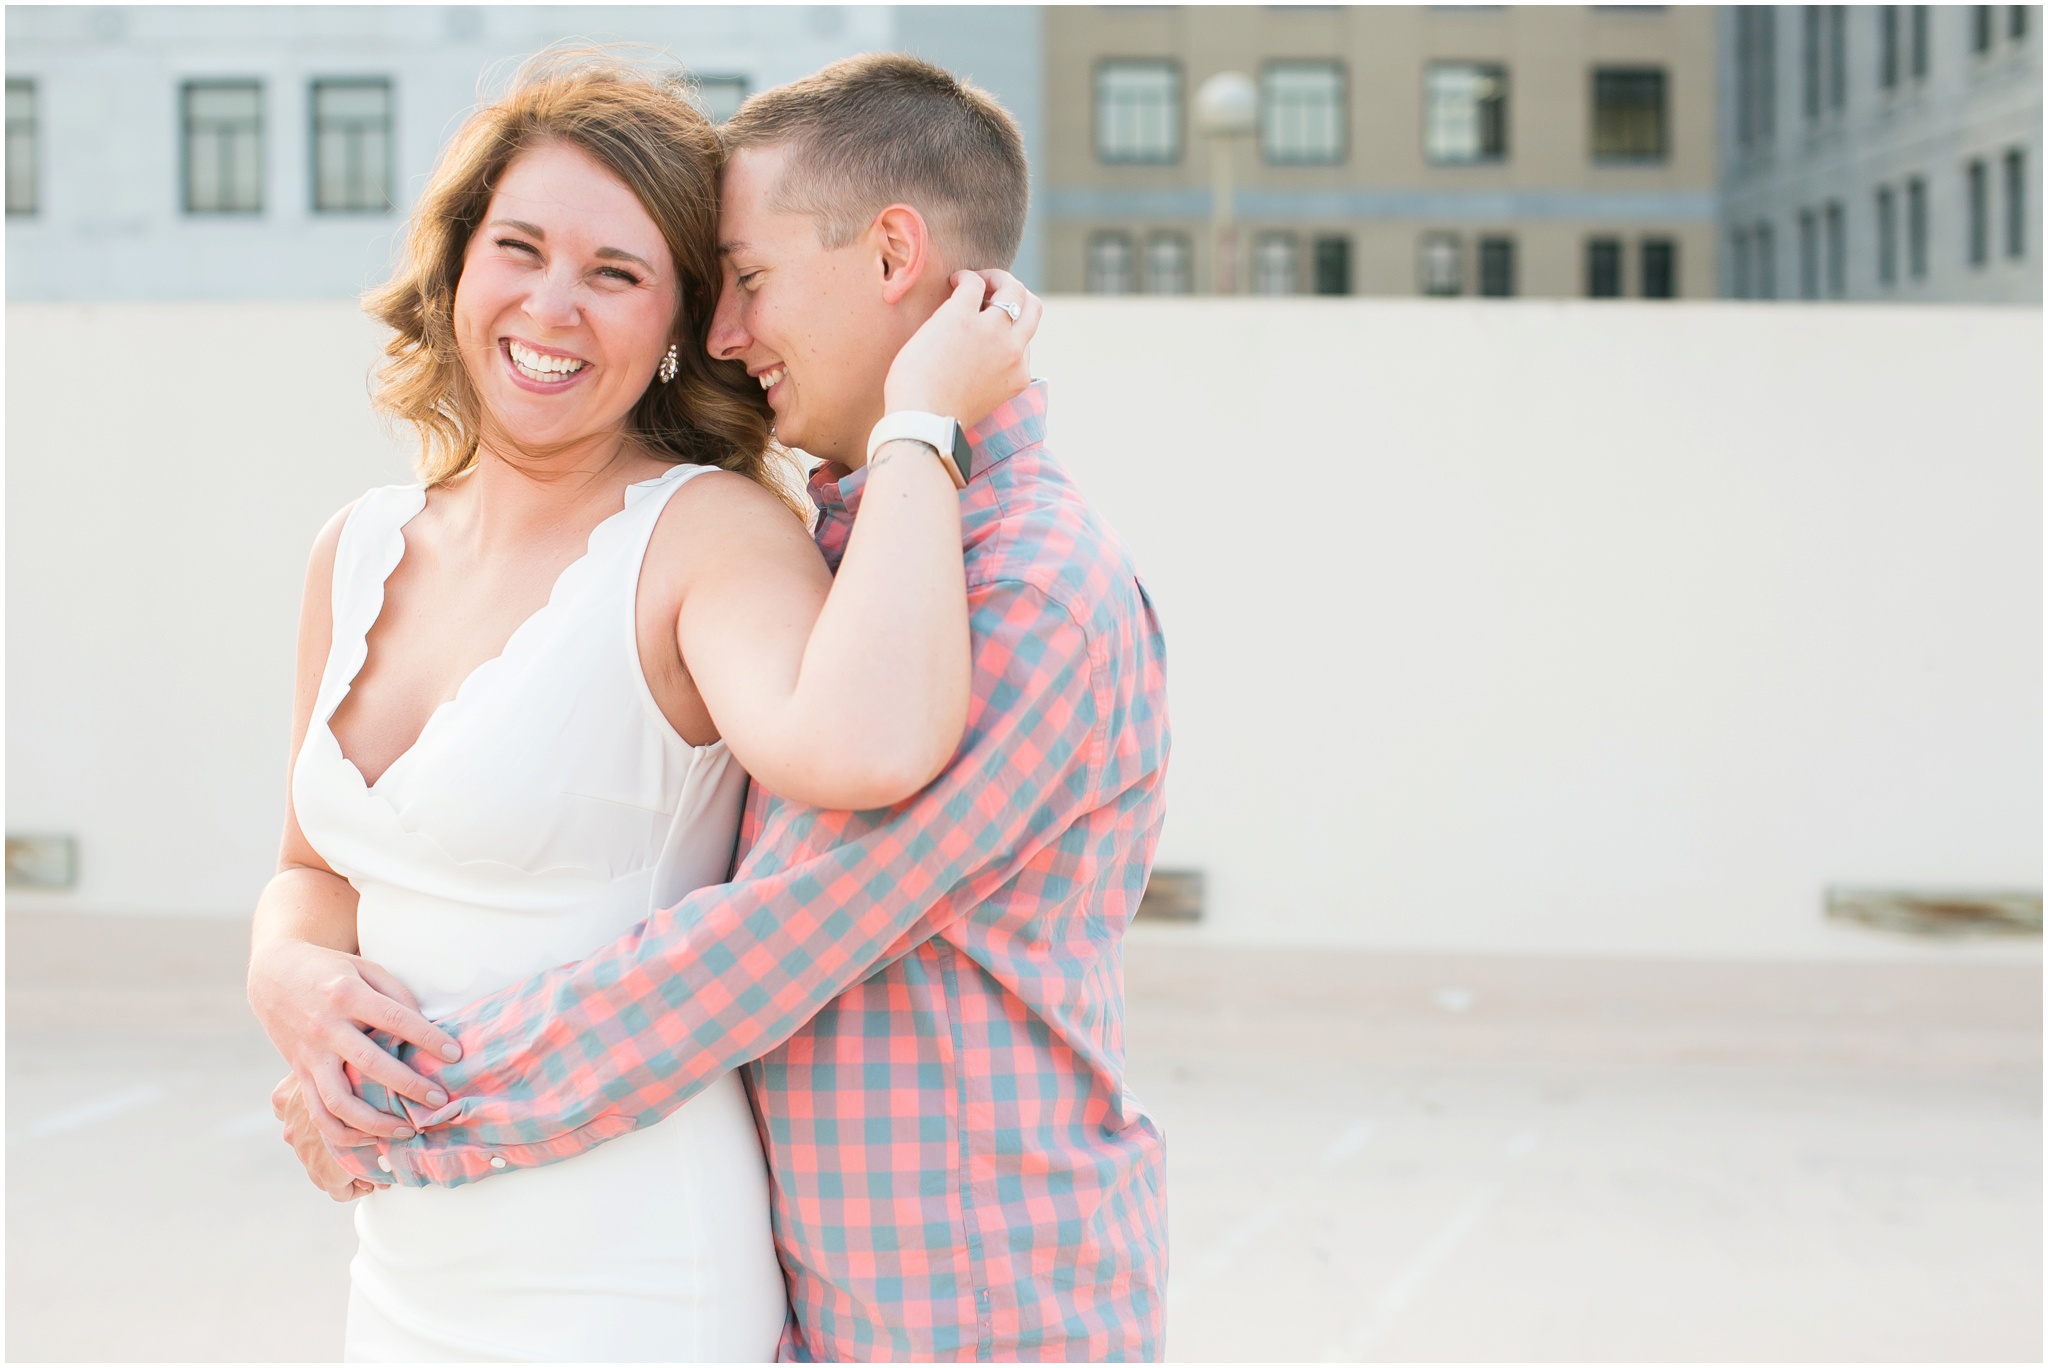 Downtown_Madison_Wisconsin_Engagement_Session_Waterfront_Monona_Terrace_0472.jpg